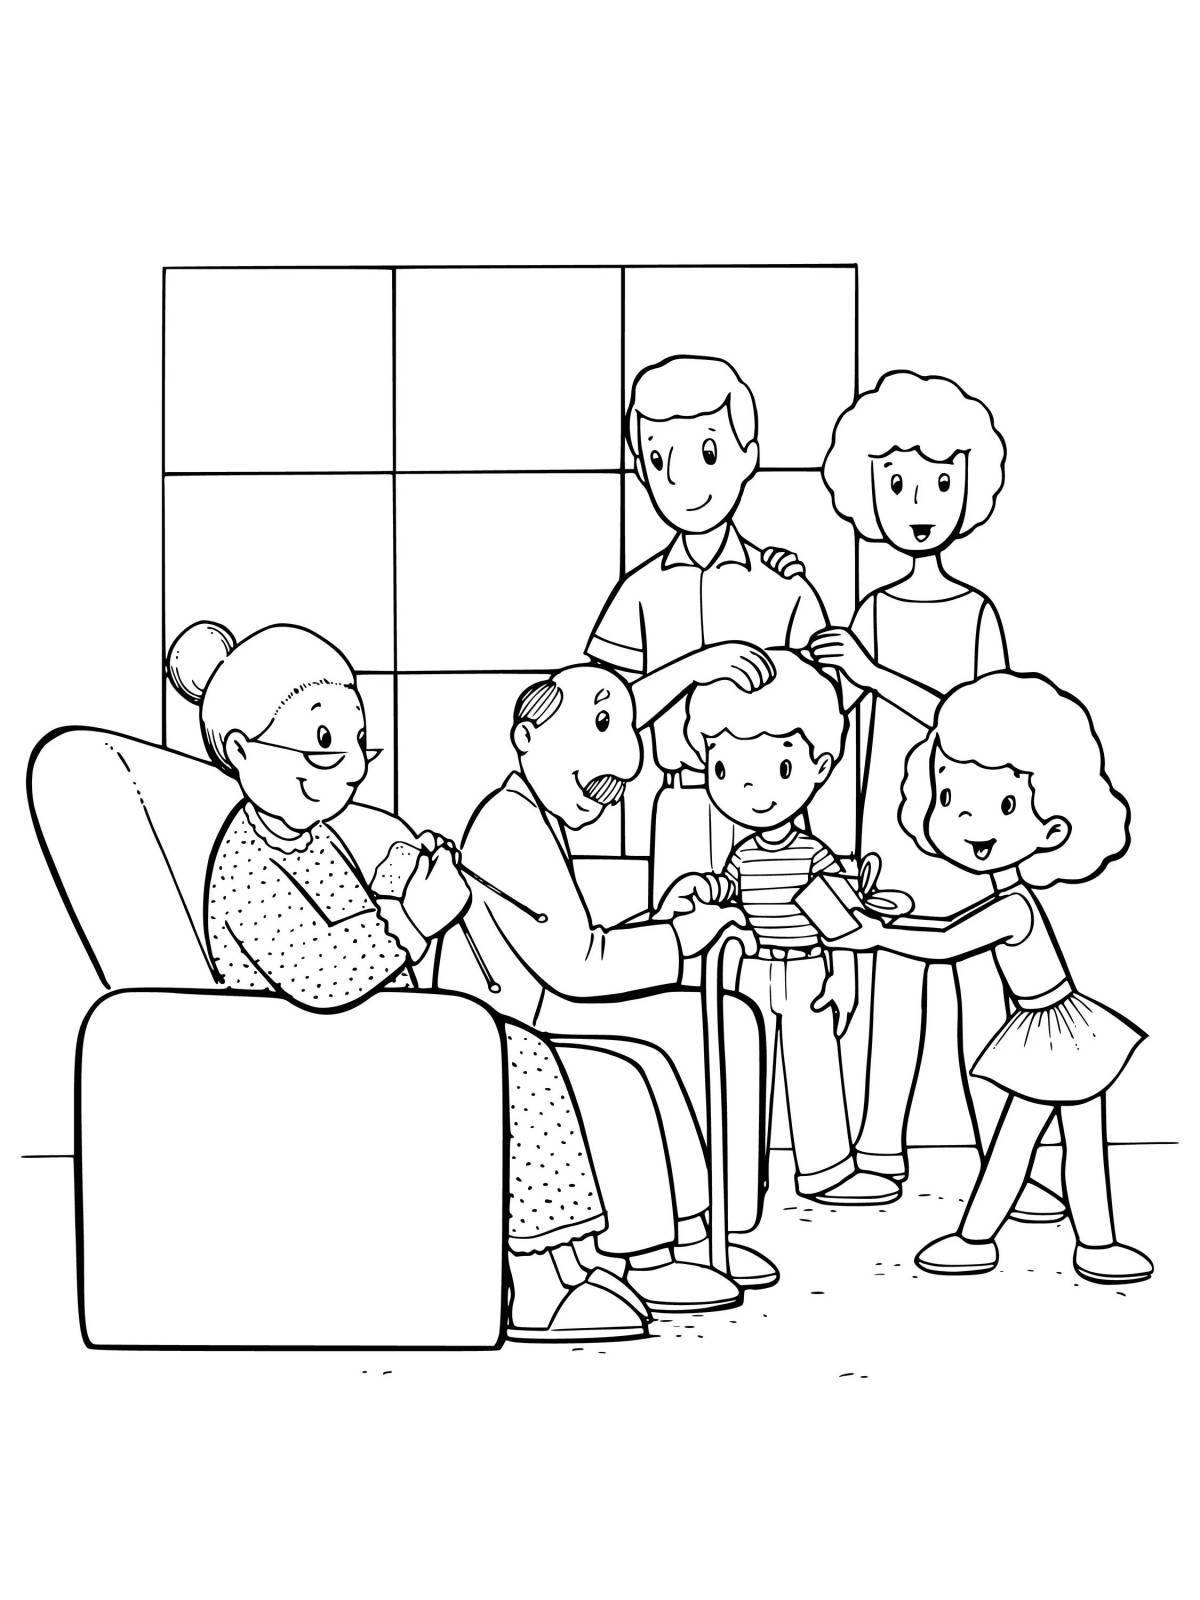 Bright sketch of my family